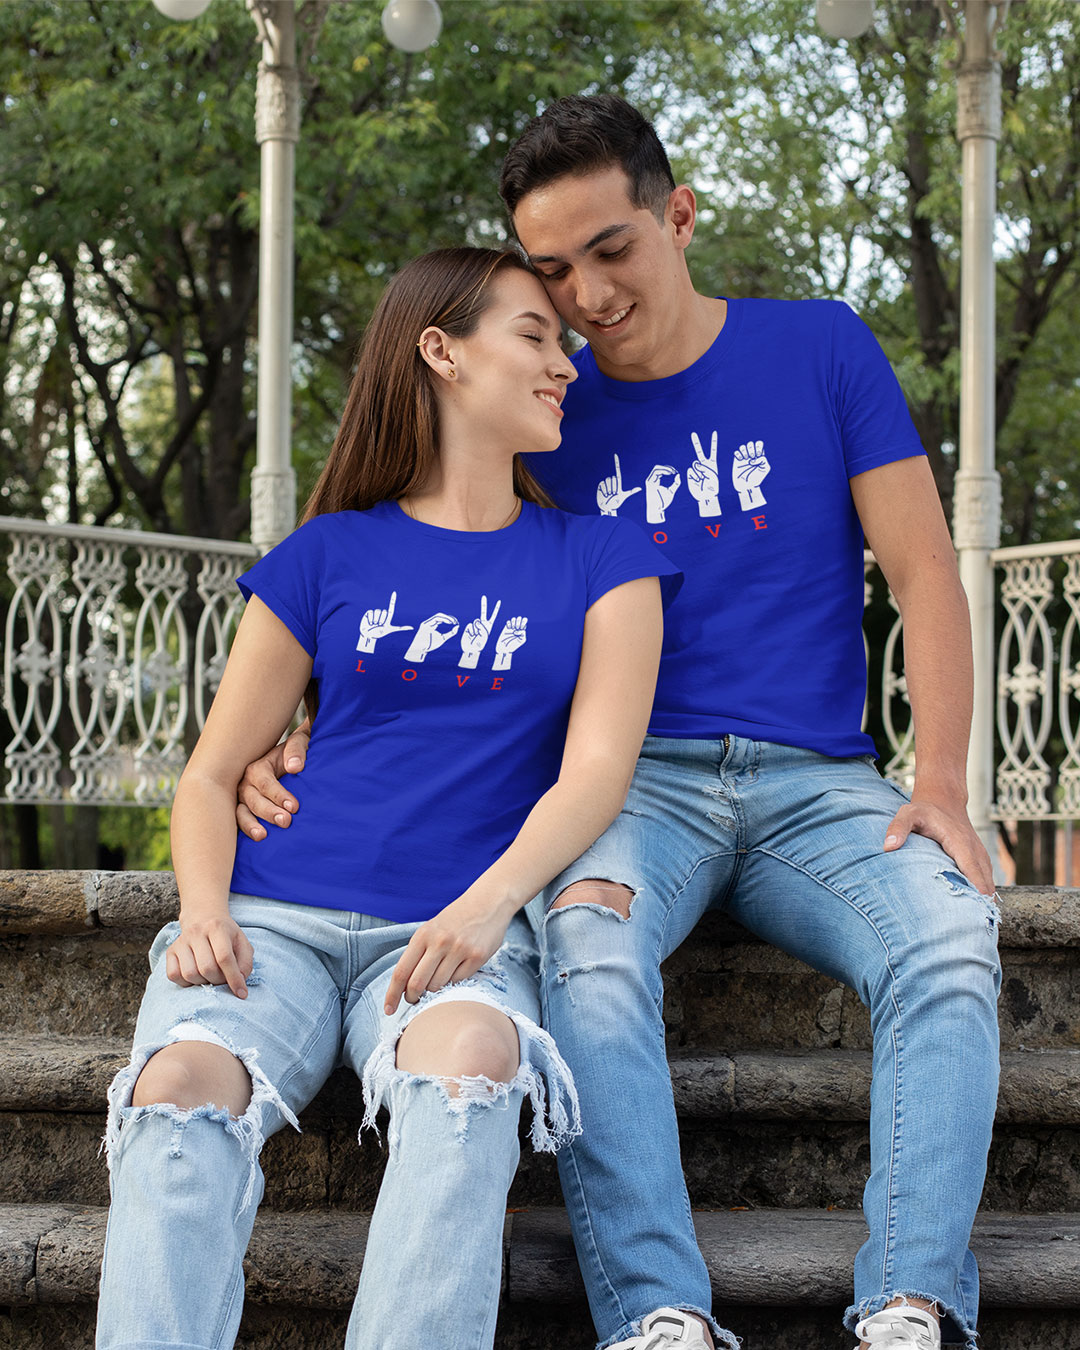 Love Hand Gestures T-shirts For Couples